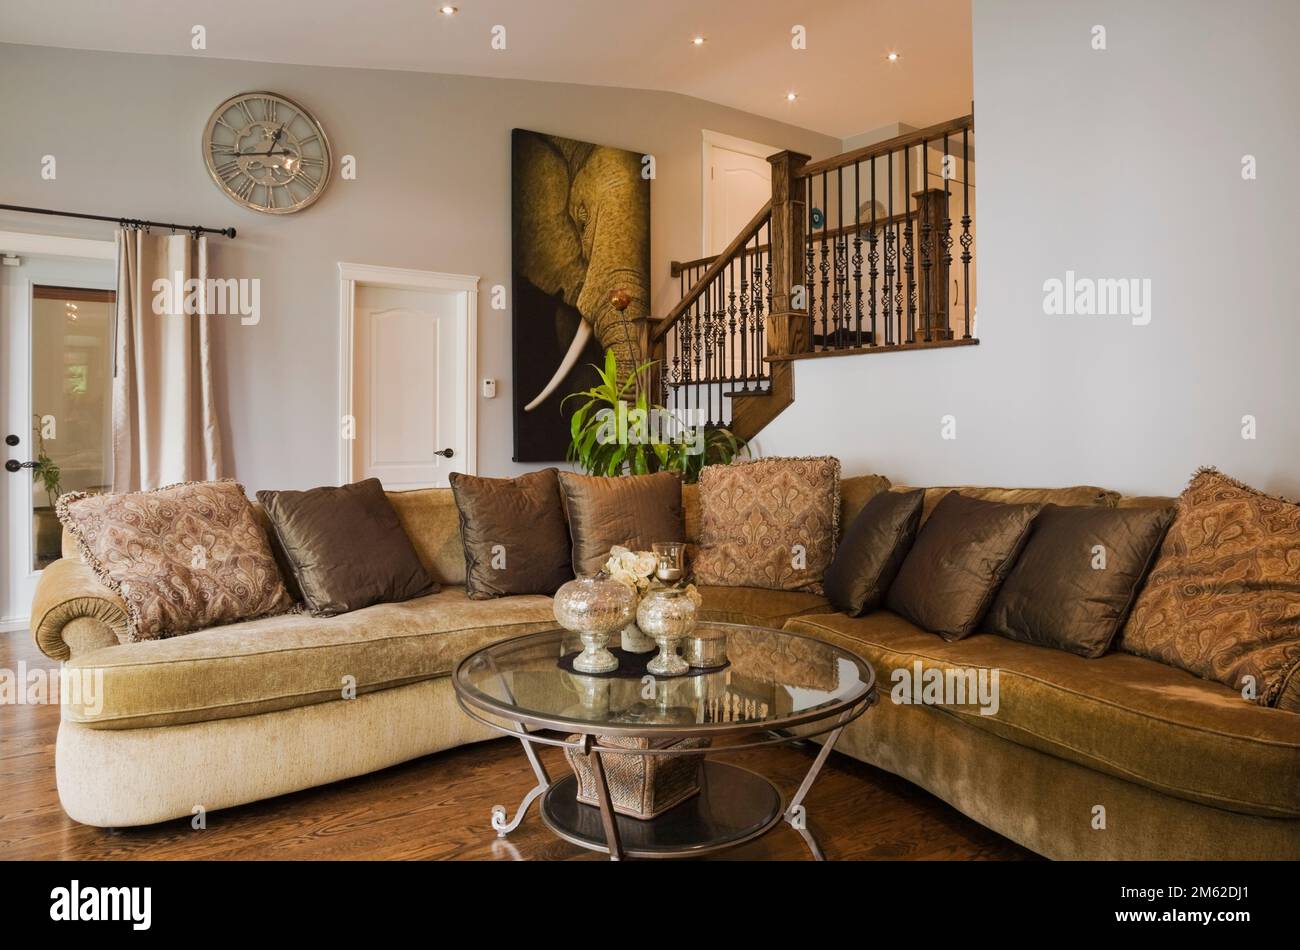 L-shaped beige and tan upholstered sofa and round glass coffee table in living room inside luxurious home. Stock Photo